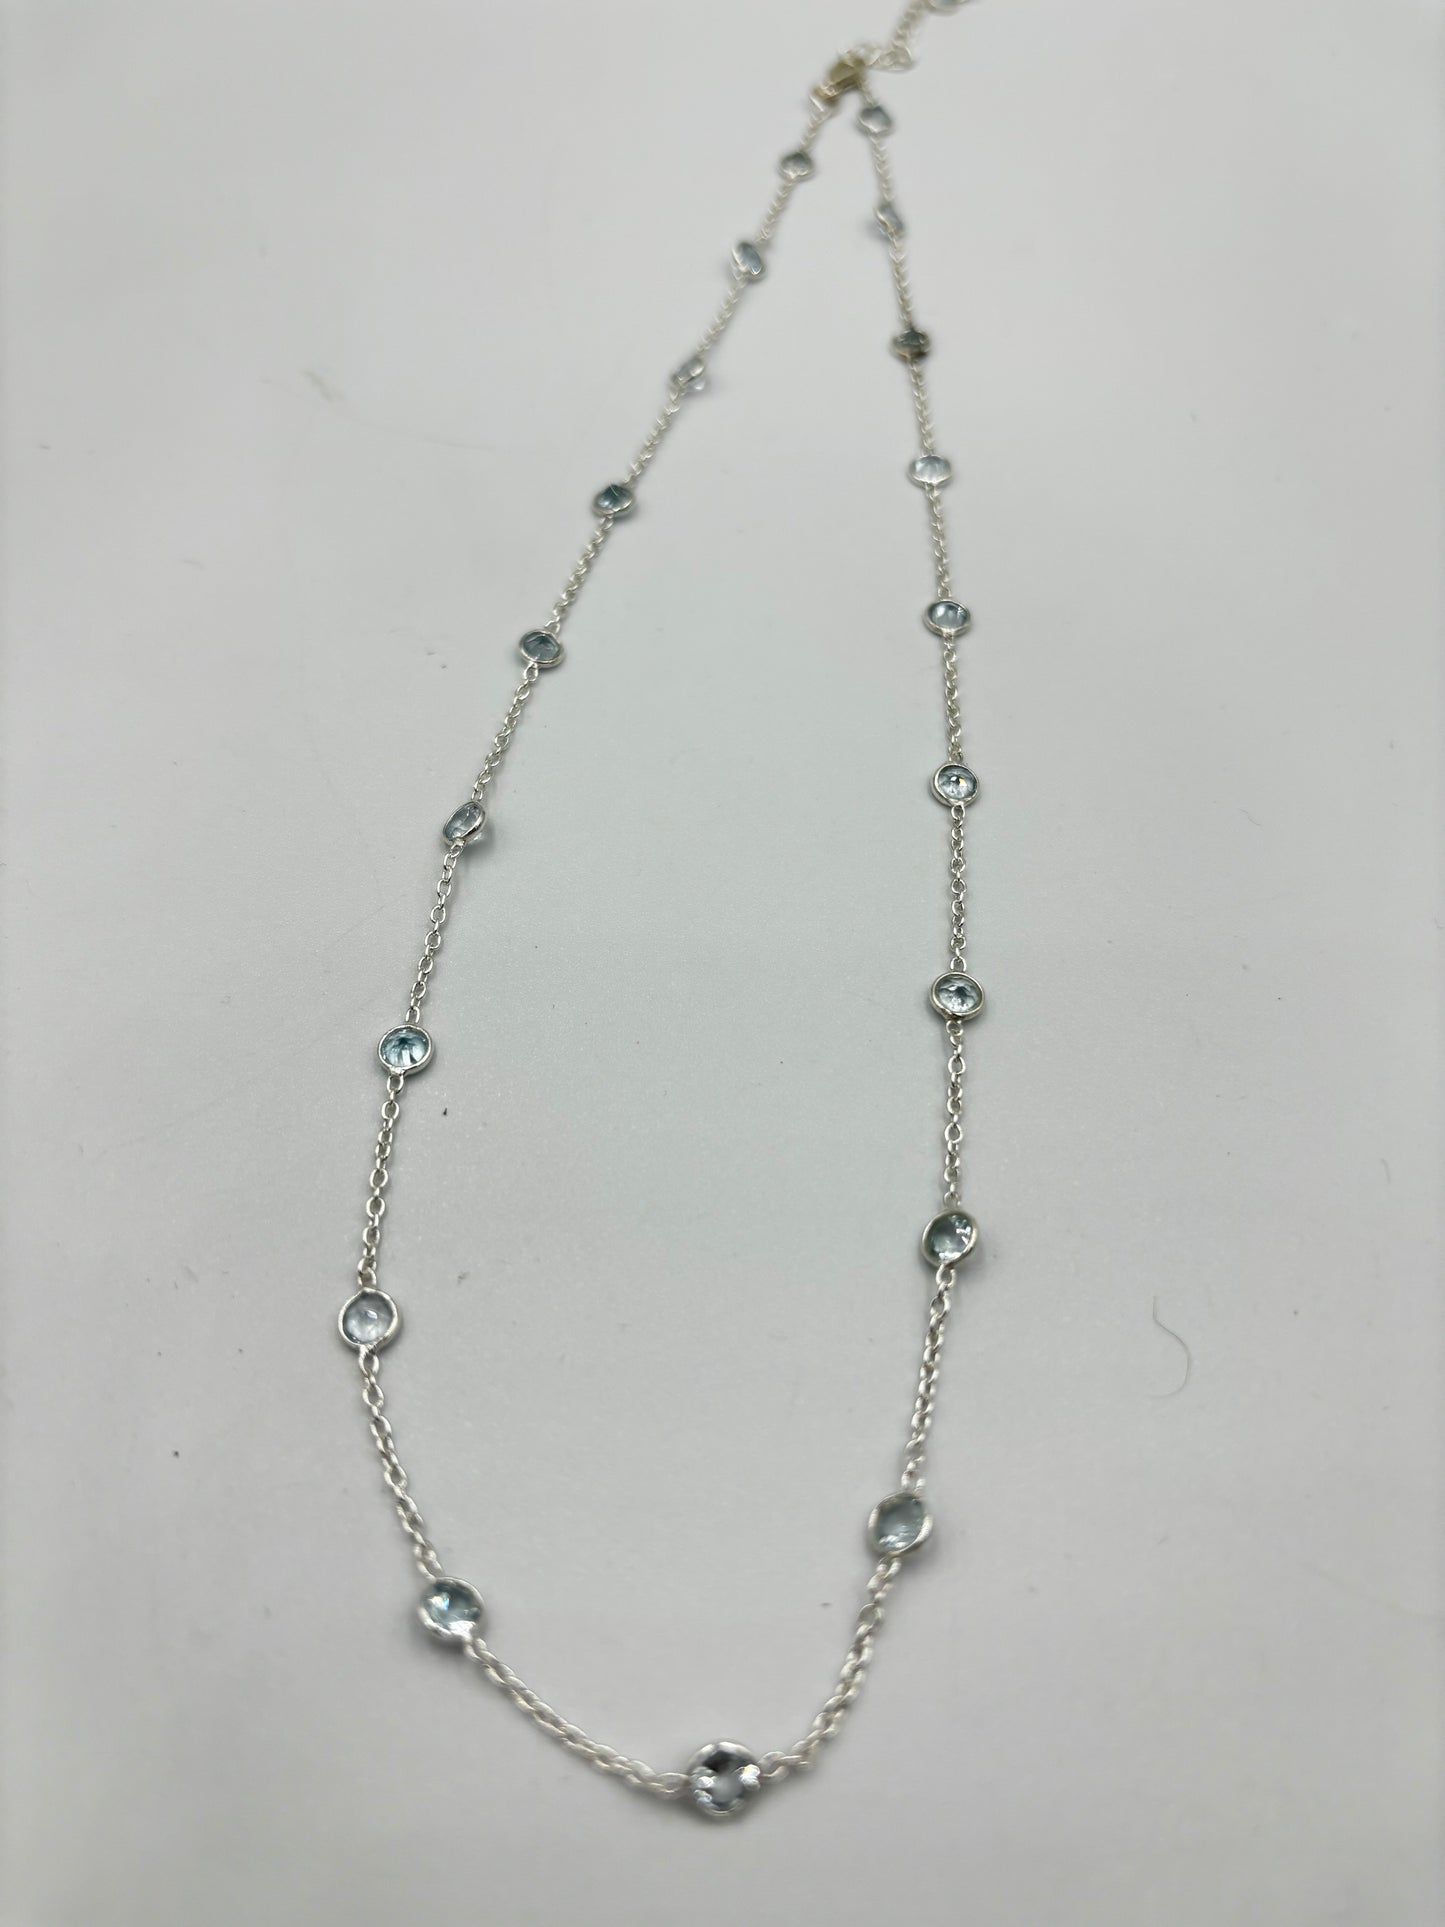 Sterling silver necklace with 5mm blue Topaz semi Precious stones in-bedded in necklace